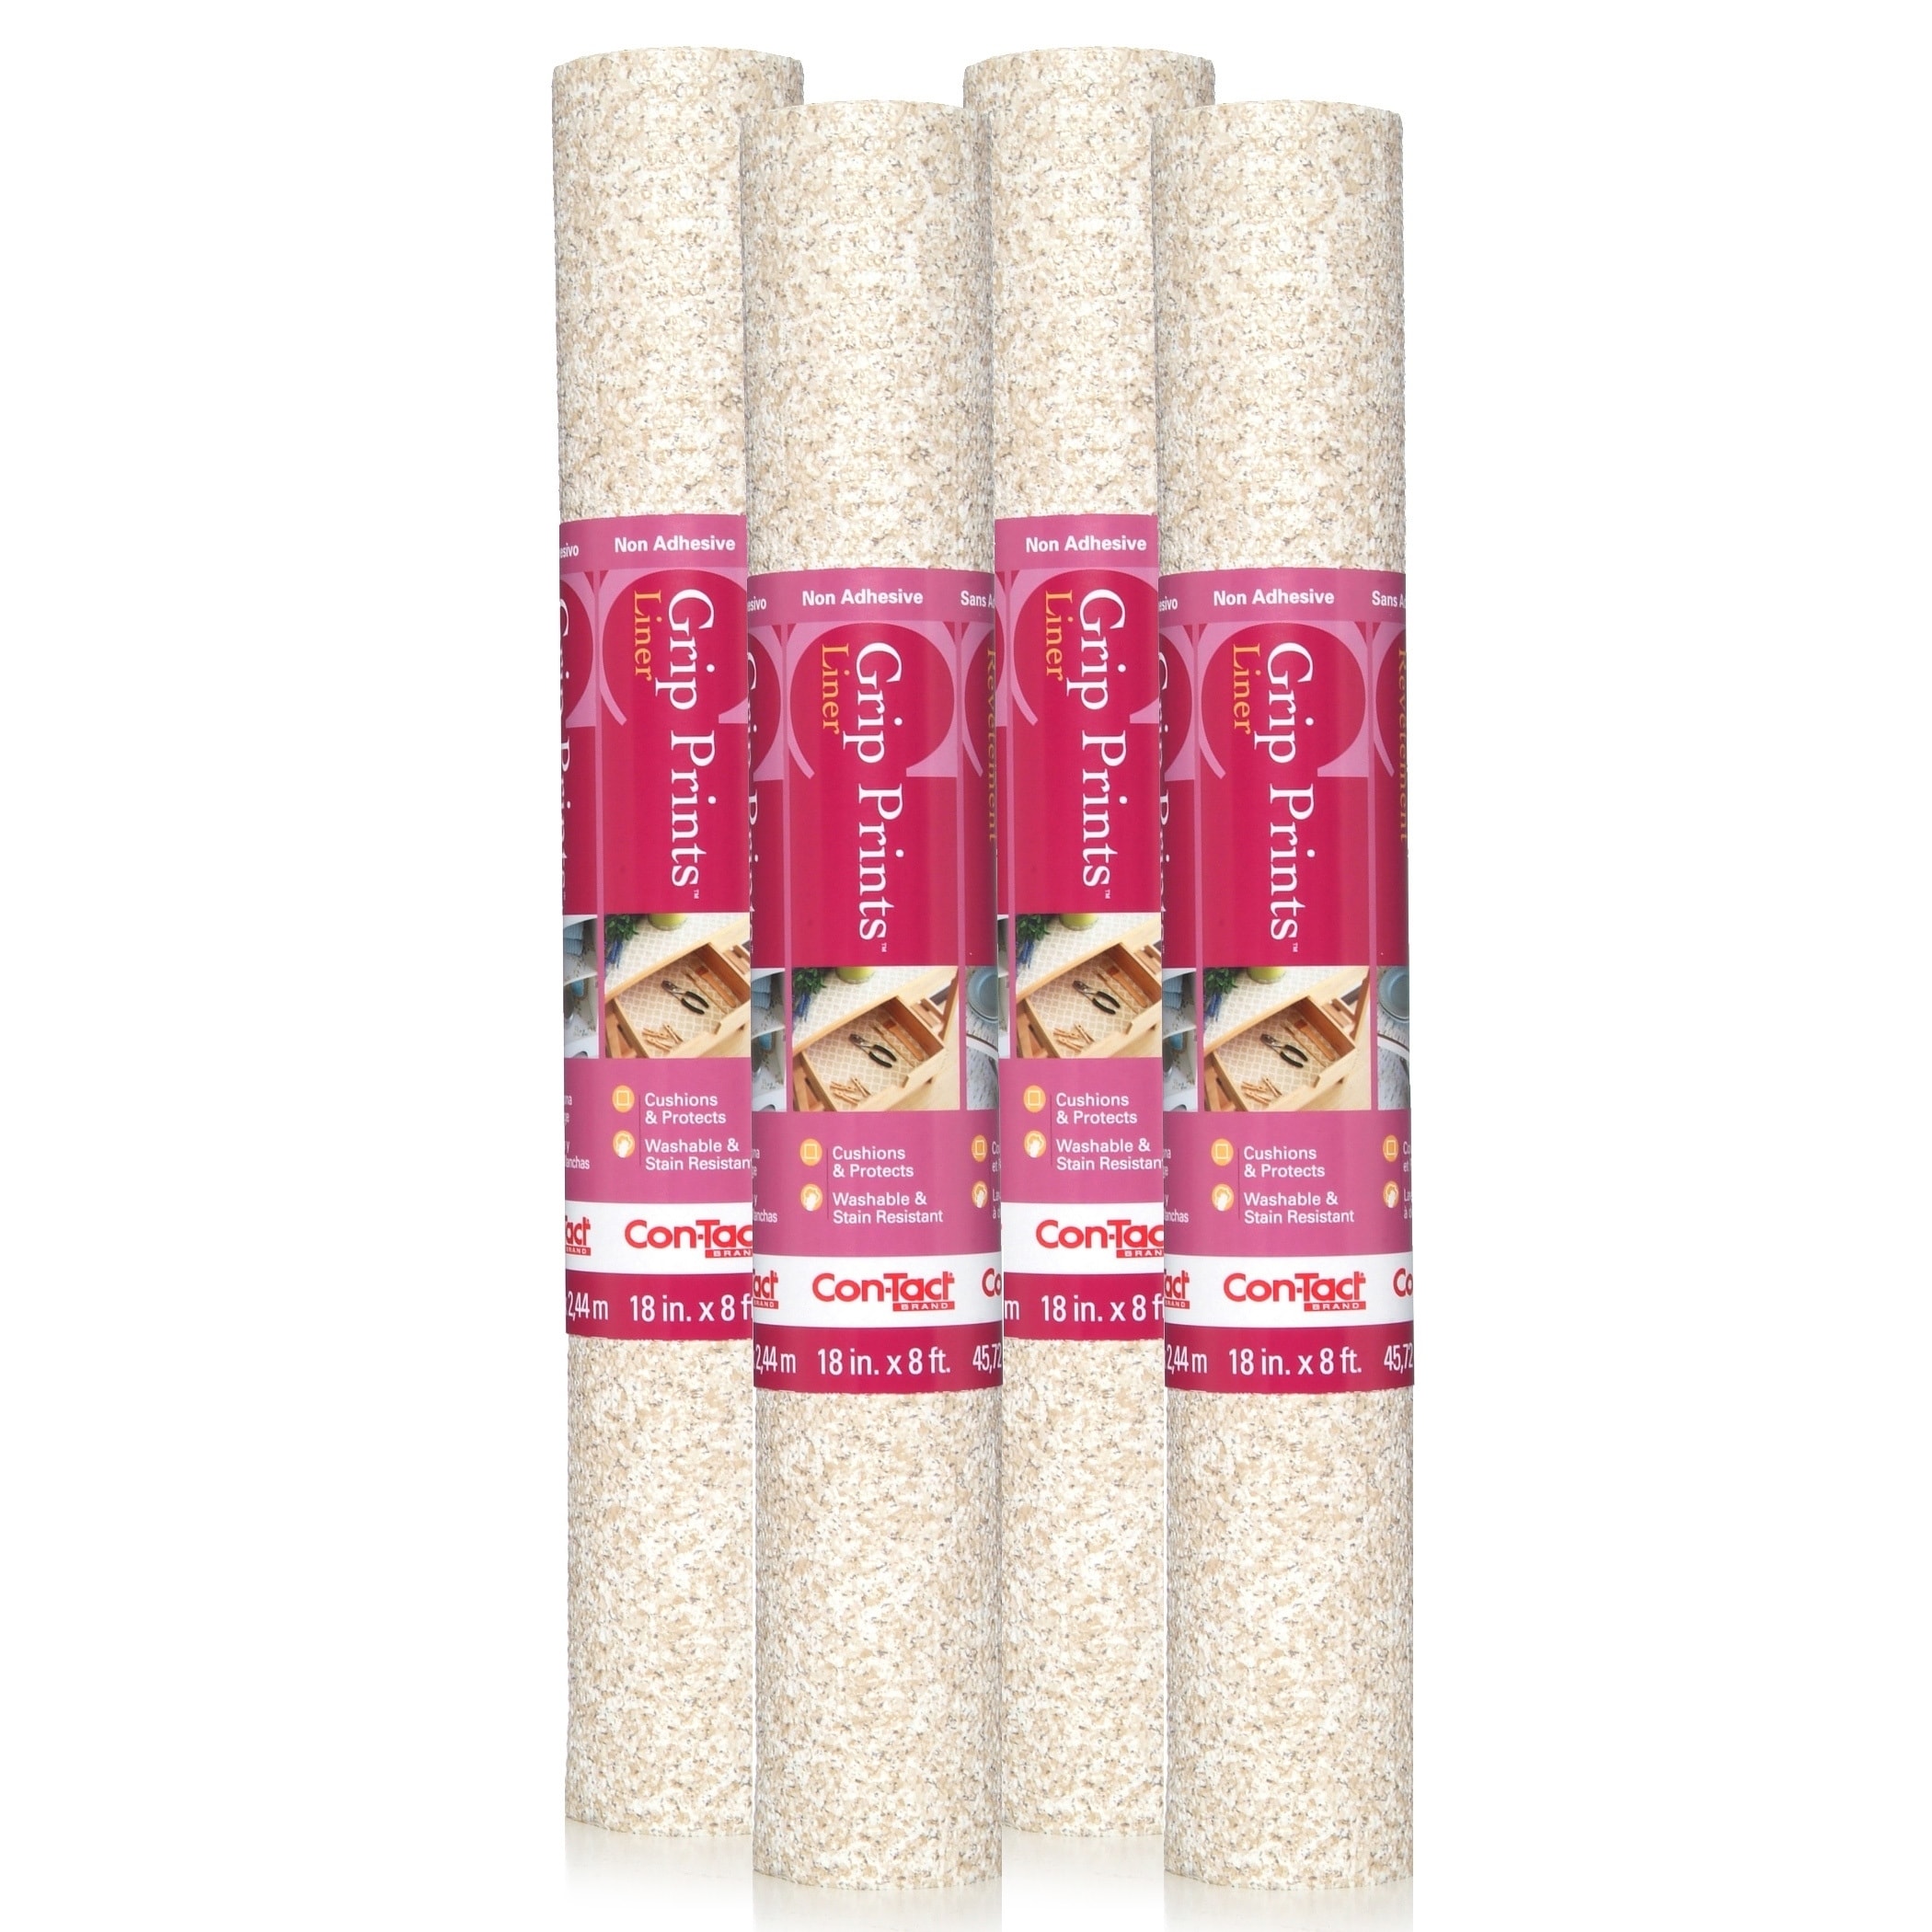 https://ak1.ostkcdn.com/images/products/9670462/Con-Tact-Brand-Grip-Prints-Non-Adhesive-Non-Slip-Shelf-and-Drawer-Liner-Beige-Granite-Pack-of-4-or-6-N-A-1ee05879-9a8d-437f-b69e-02a7e655145f.jpg